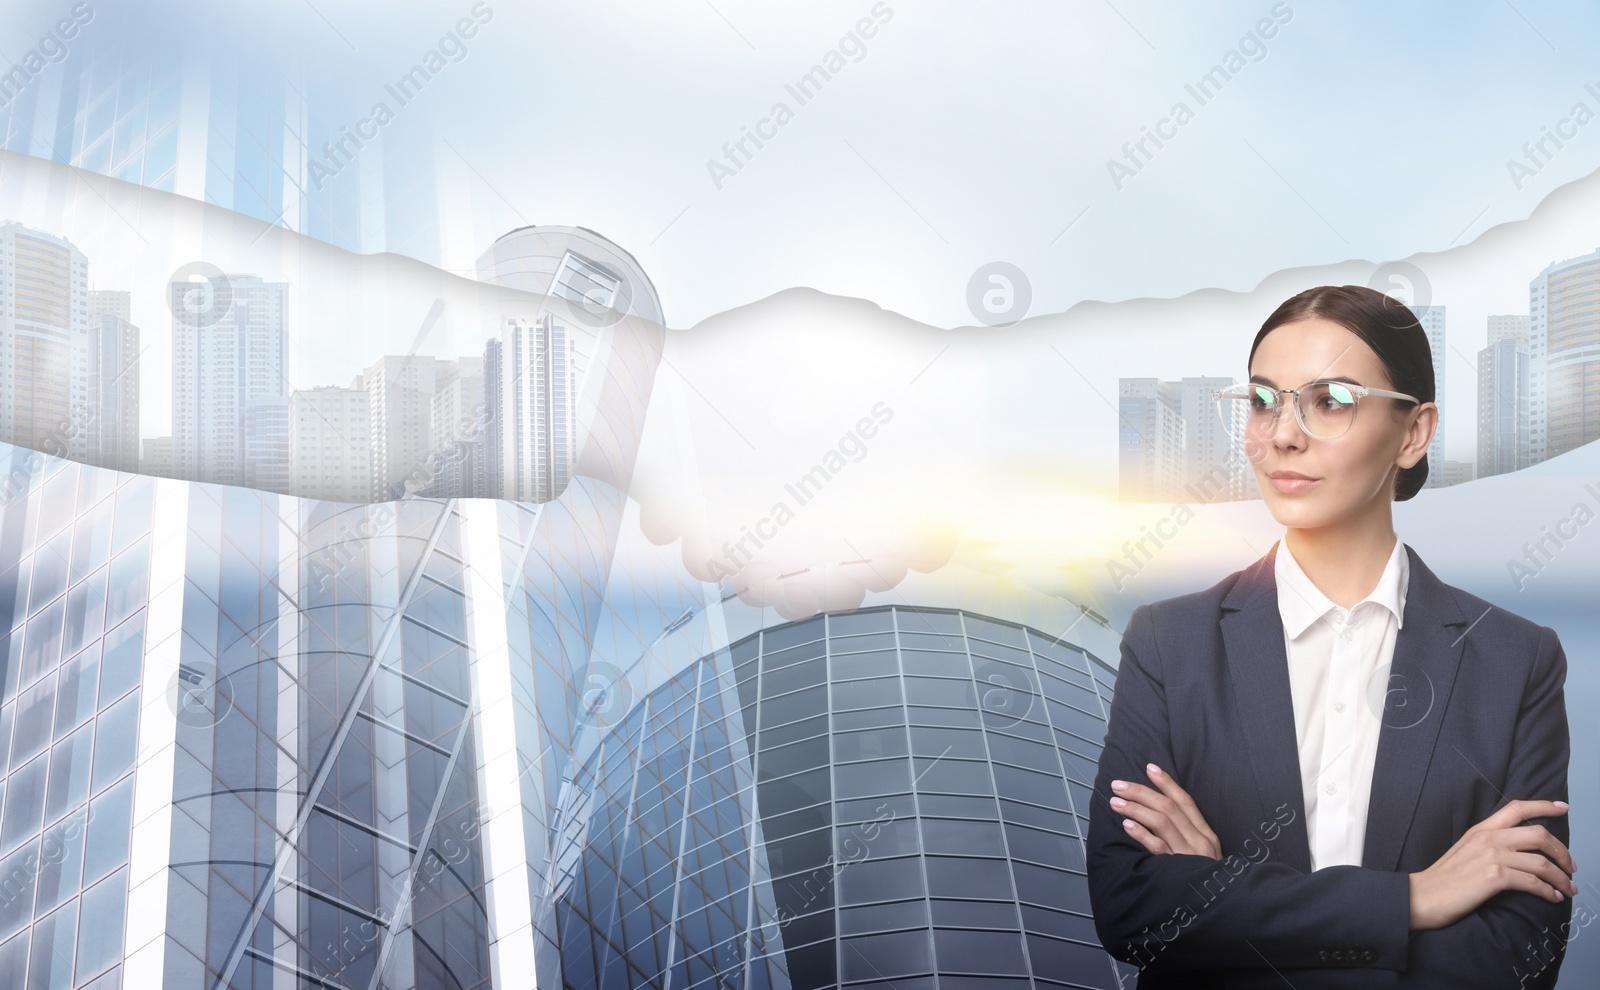 Image of Multiple exposure of businesswoman, partners shaking hands and cityscape